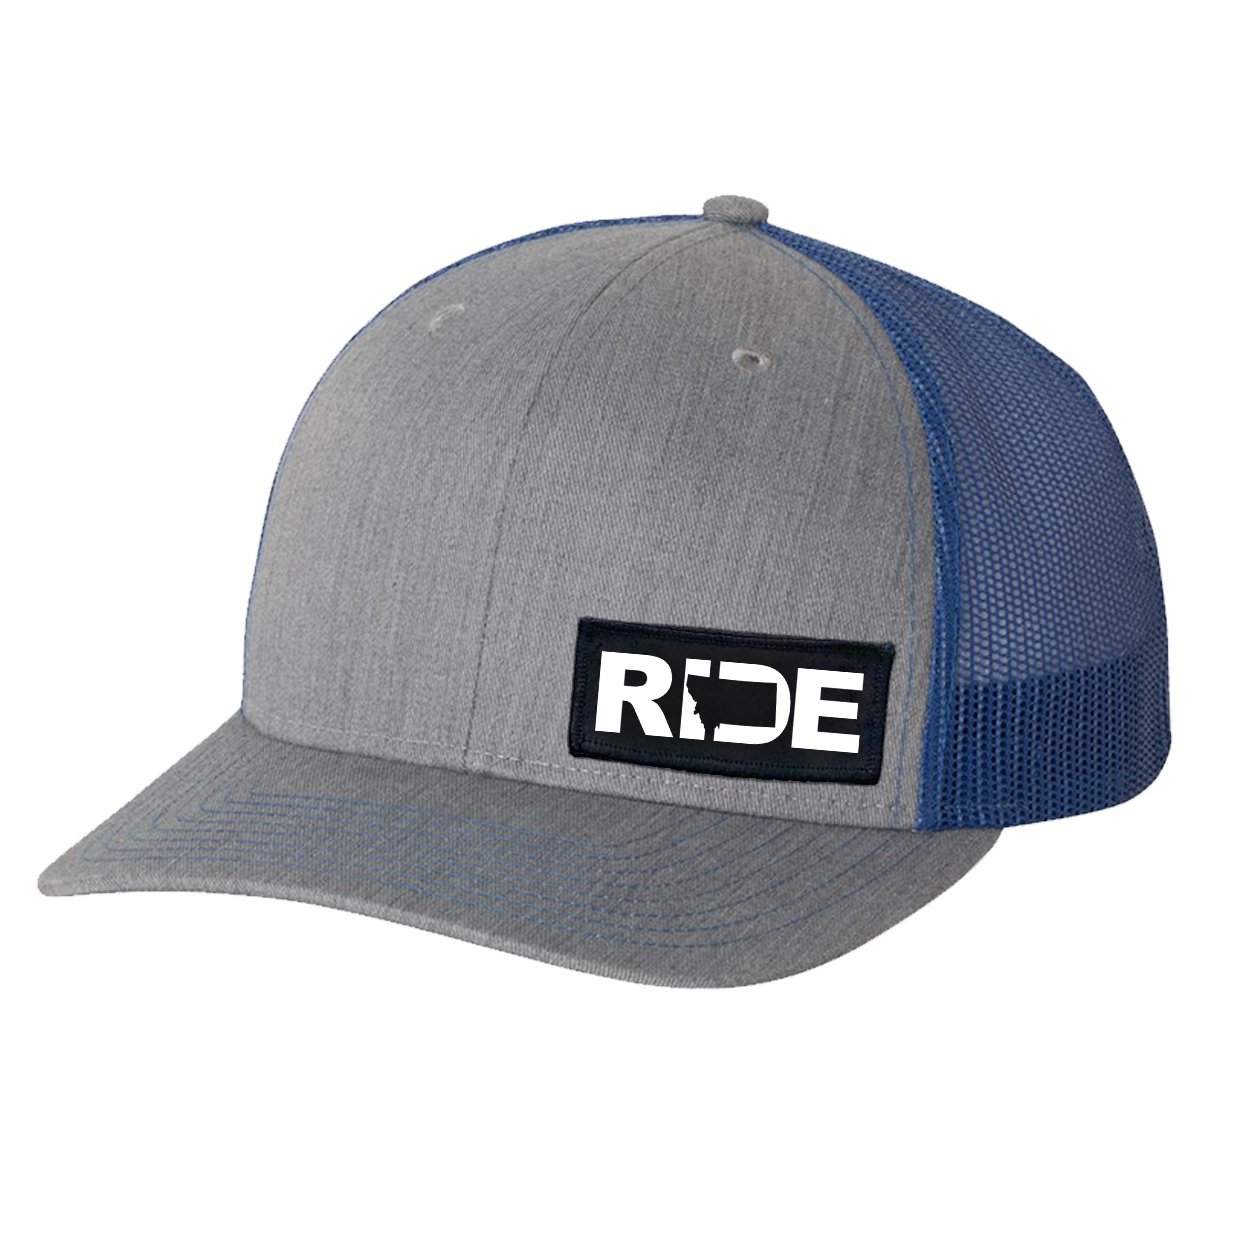 Ride Montana Night Out Woven Patch Snapback Trucker Hat Heather Grey/Royal (White Logo)